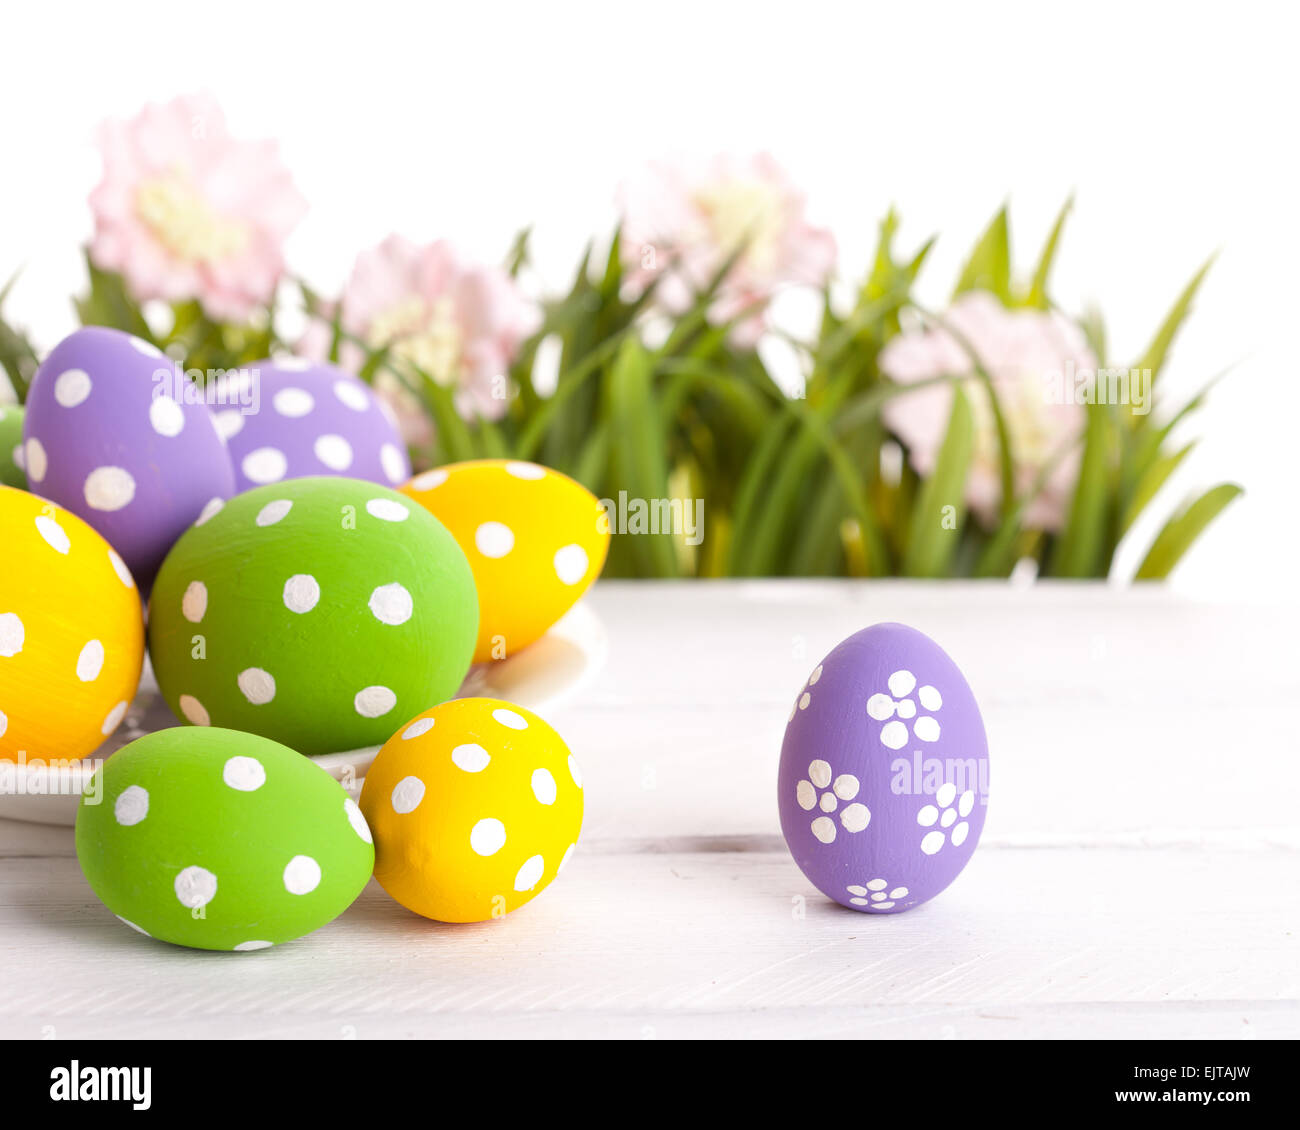 Easter colored eggs on the green grass. Stock Photo